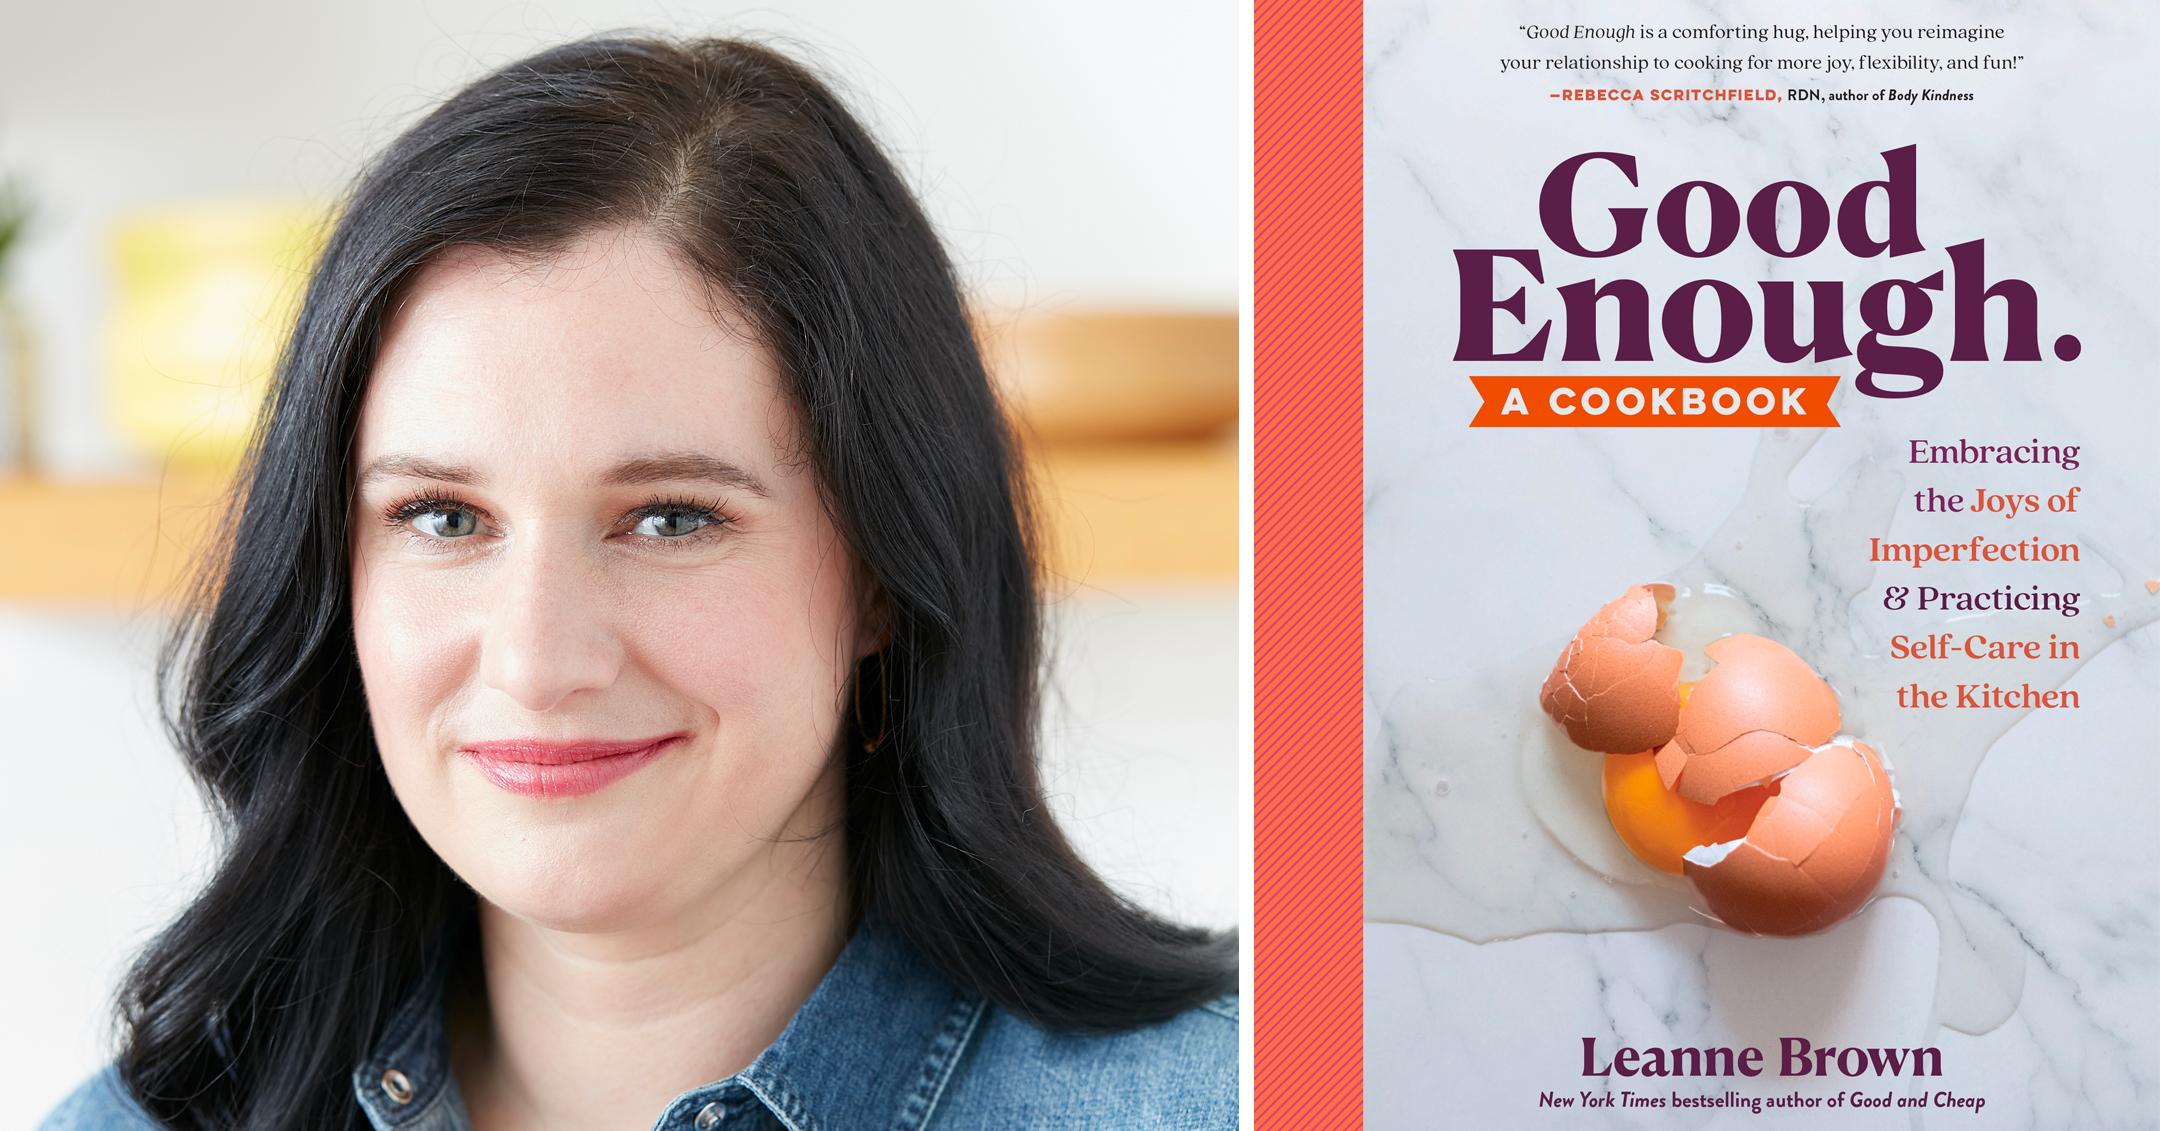 leanne brown discusses new mentality cookbook good enough